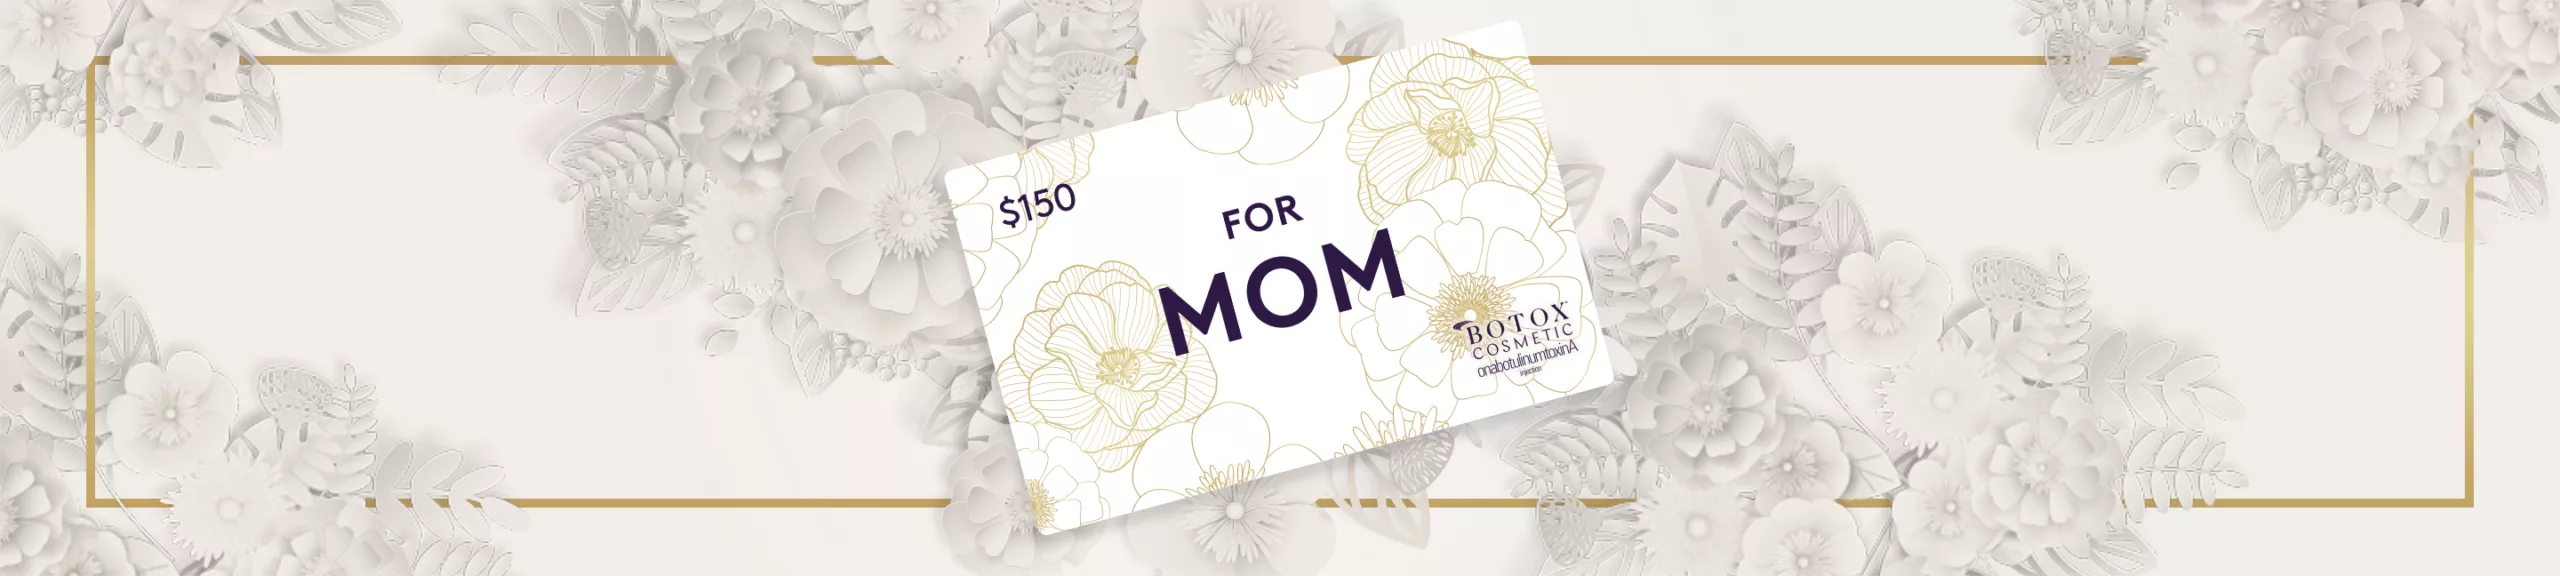 Mother's Day Special Banner - Celebrate with Beauty Treatments